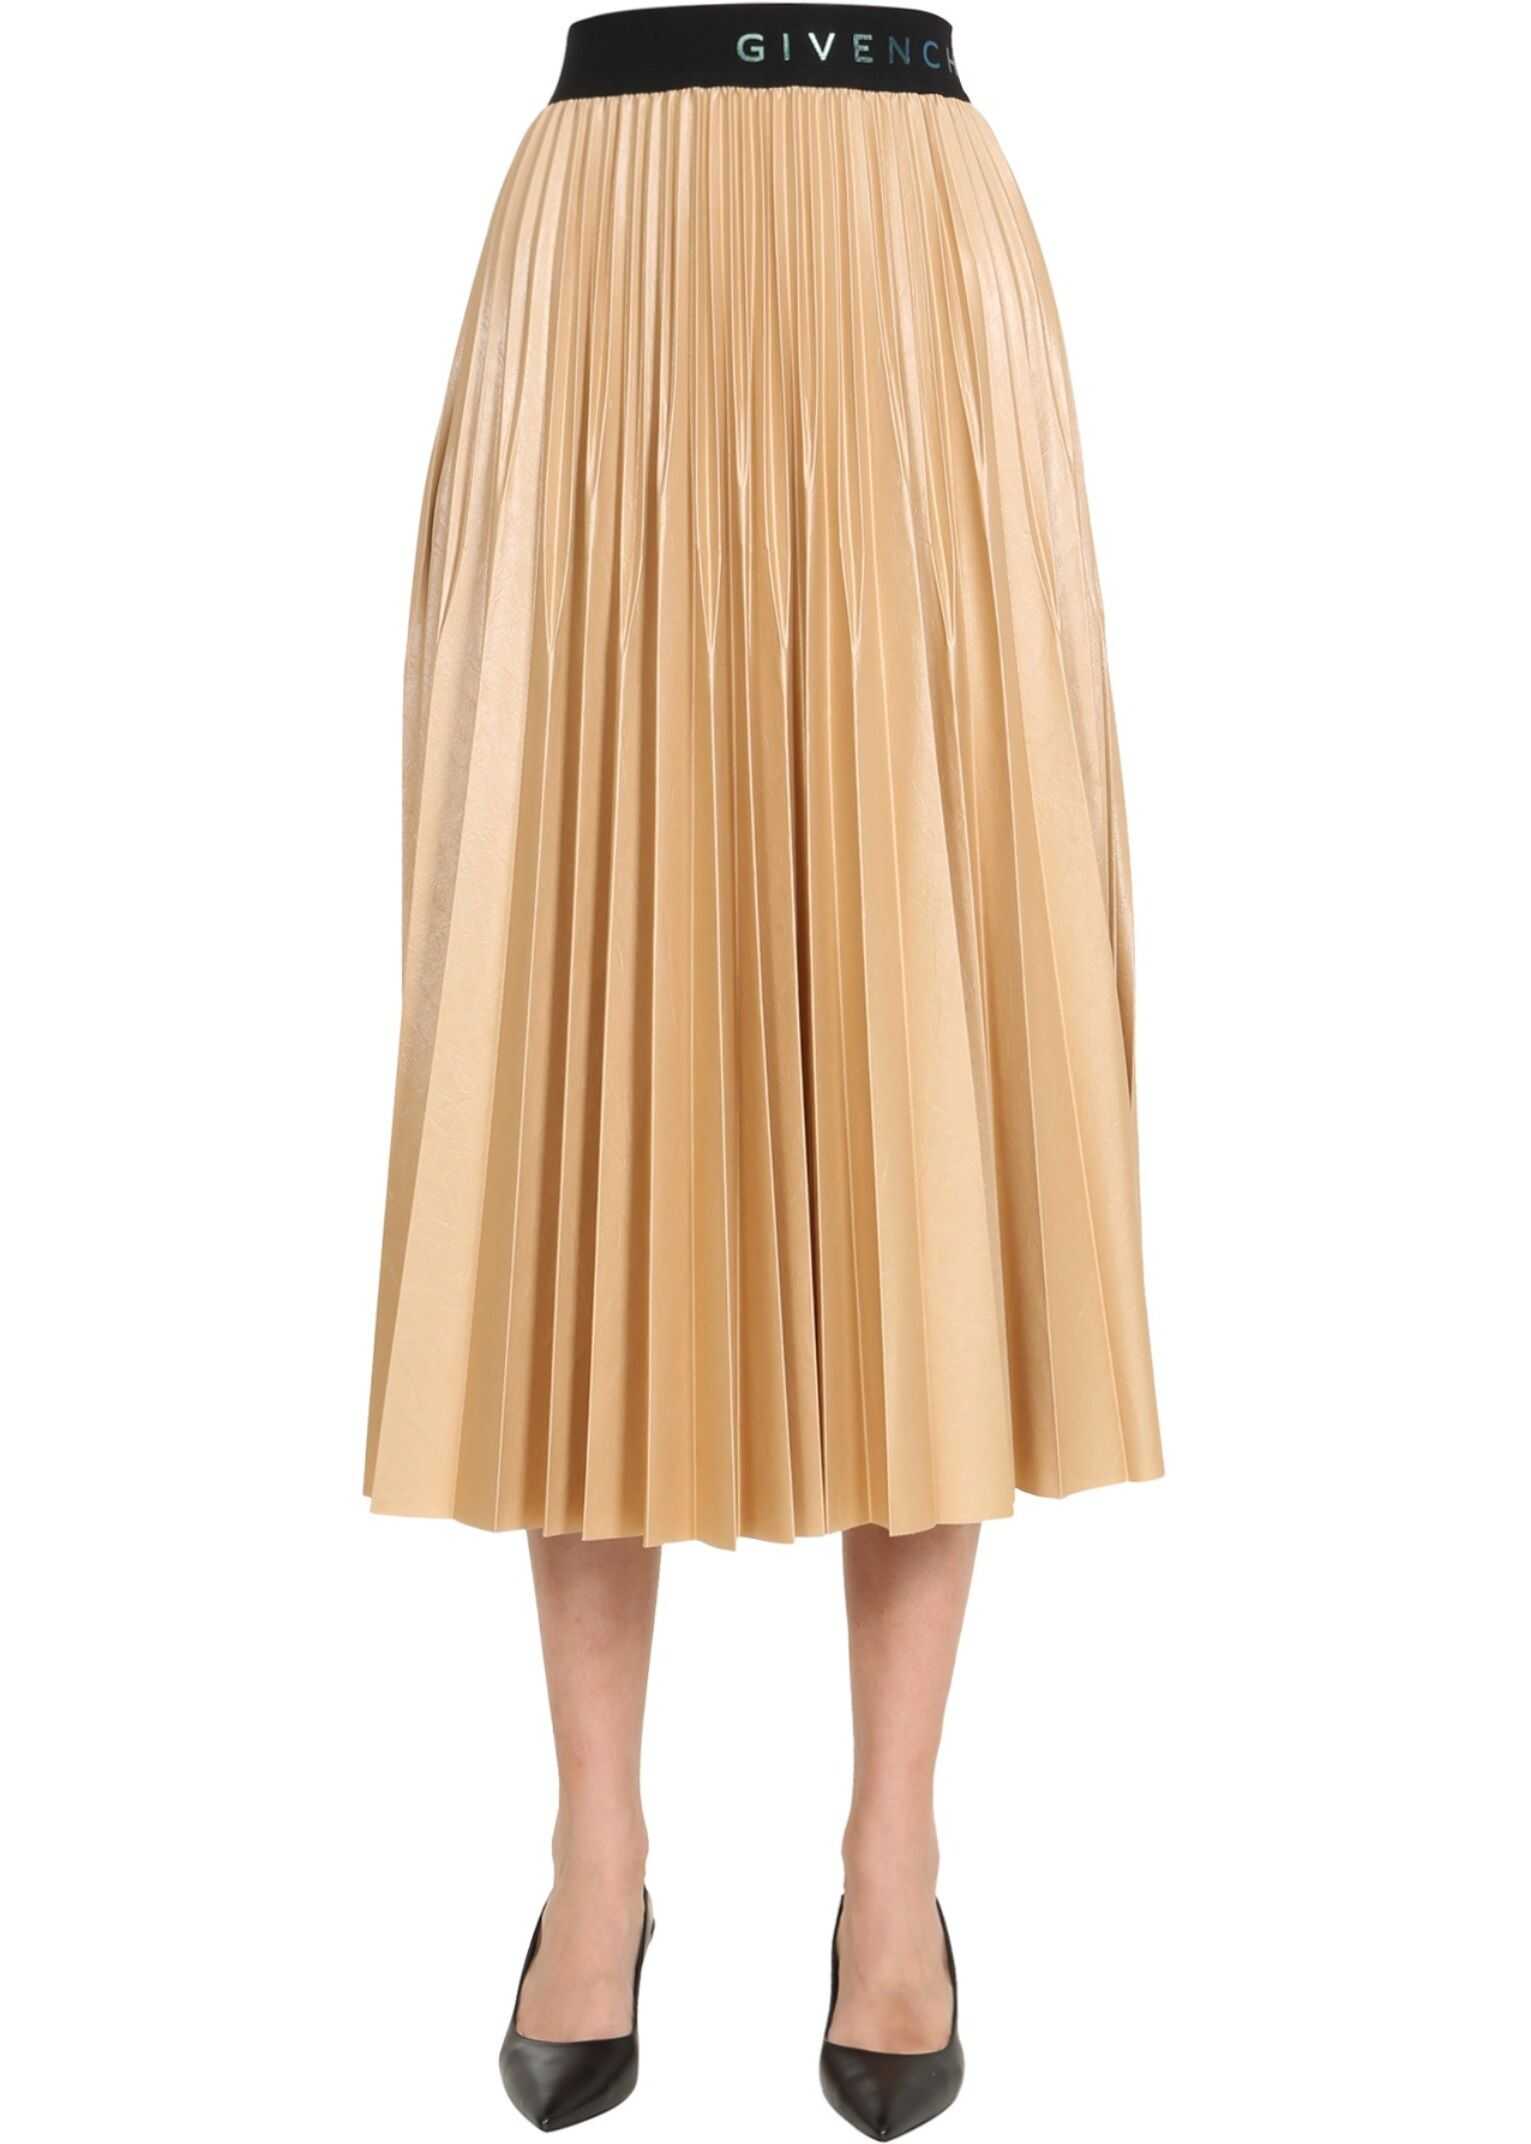 Givenchy Pleated Skirt BEIGE